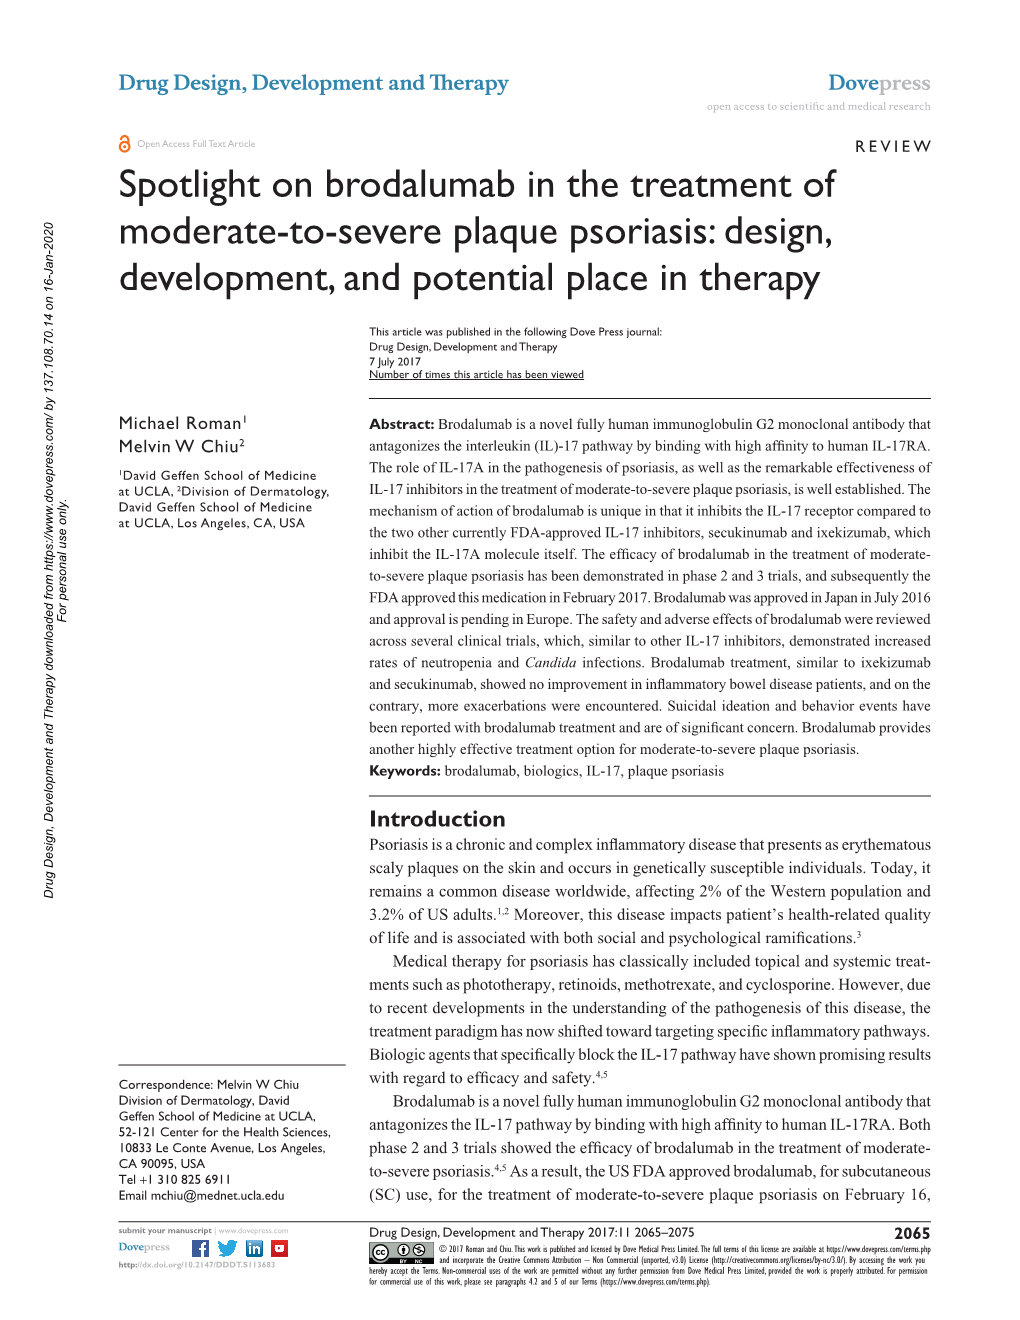 Spotlight on Brodalumab in the Treatment of Moderate-To-Severe Plaque Psoriasis: Design, Development, and Potential Place in Therapy